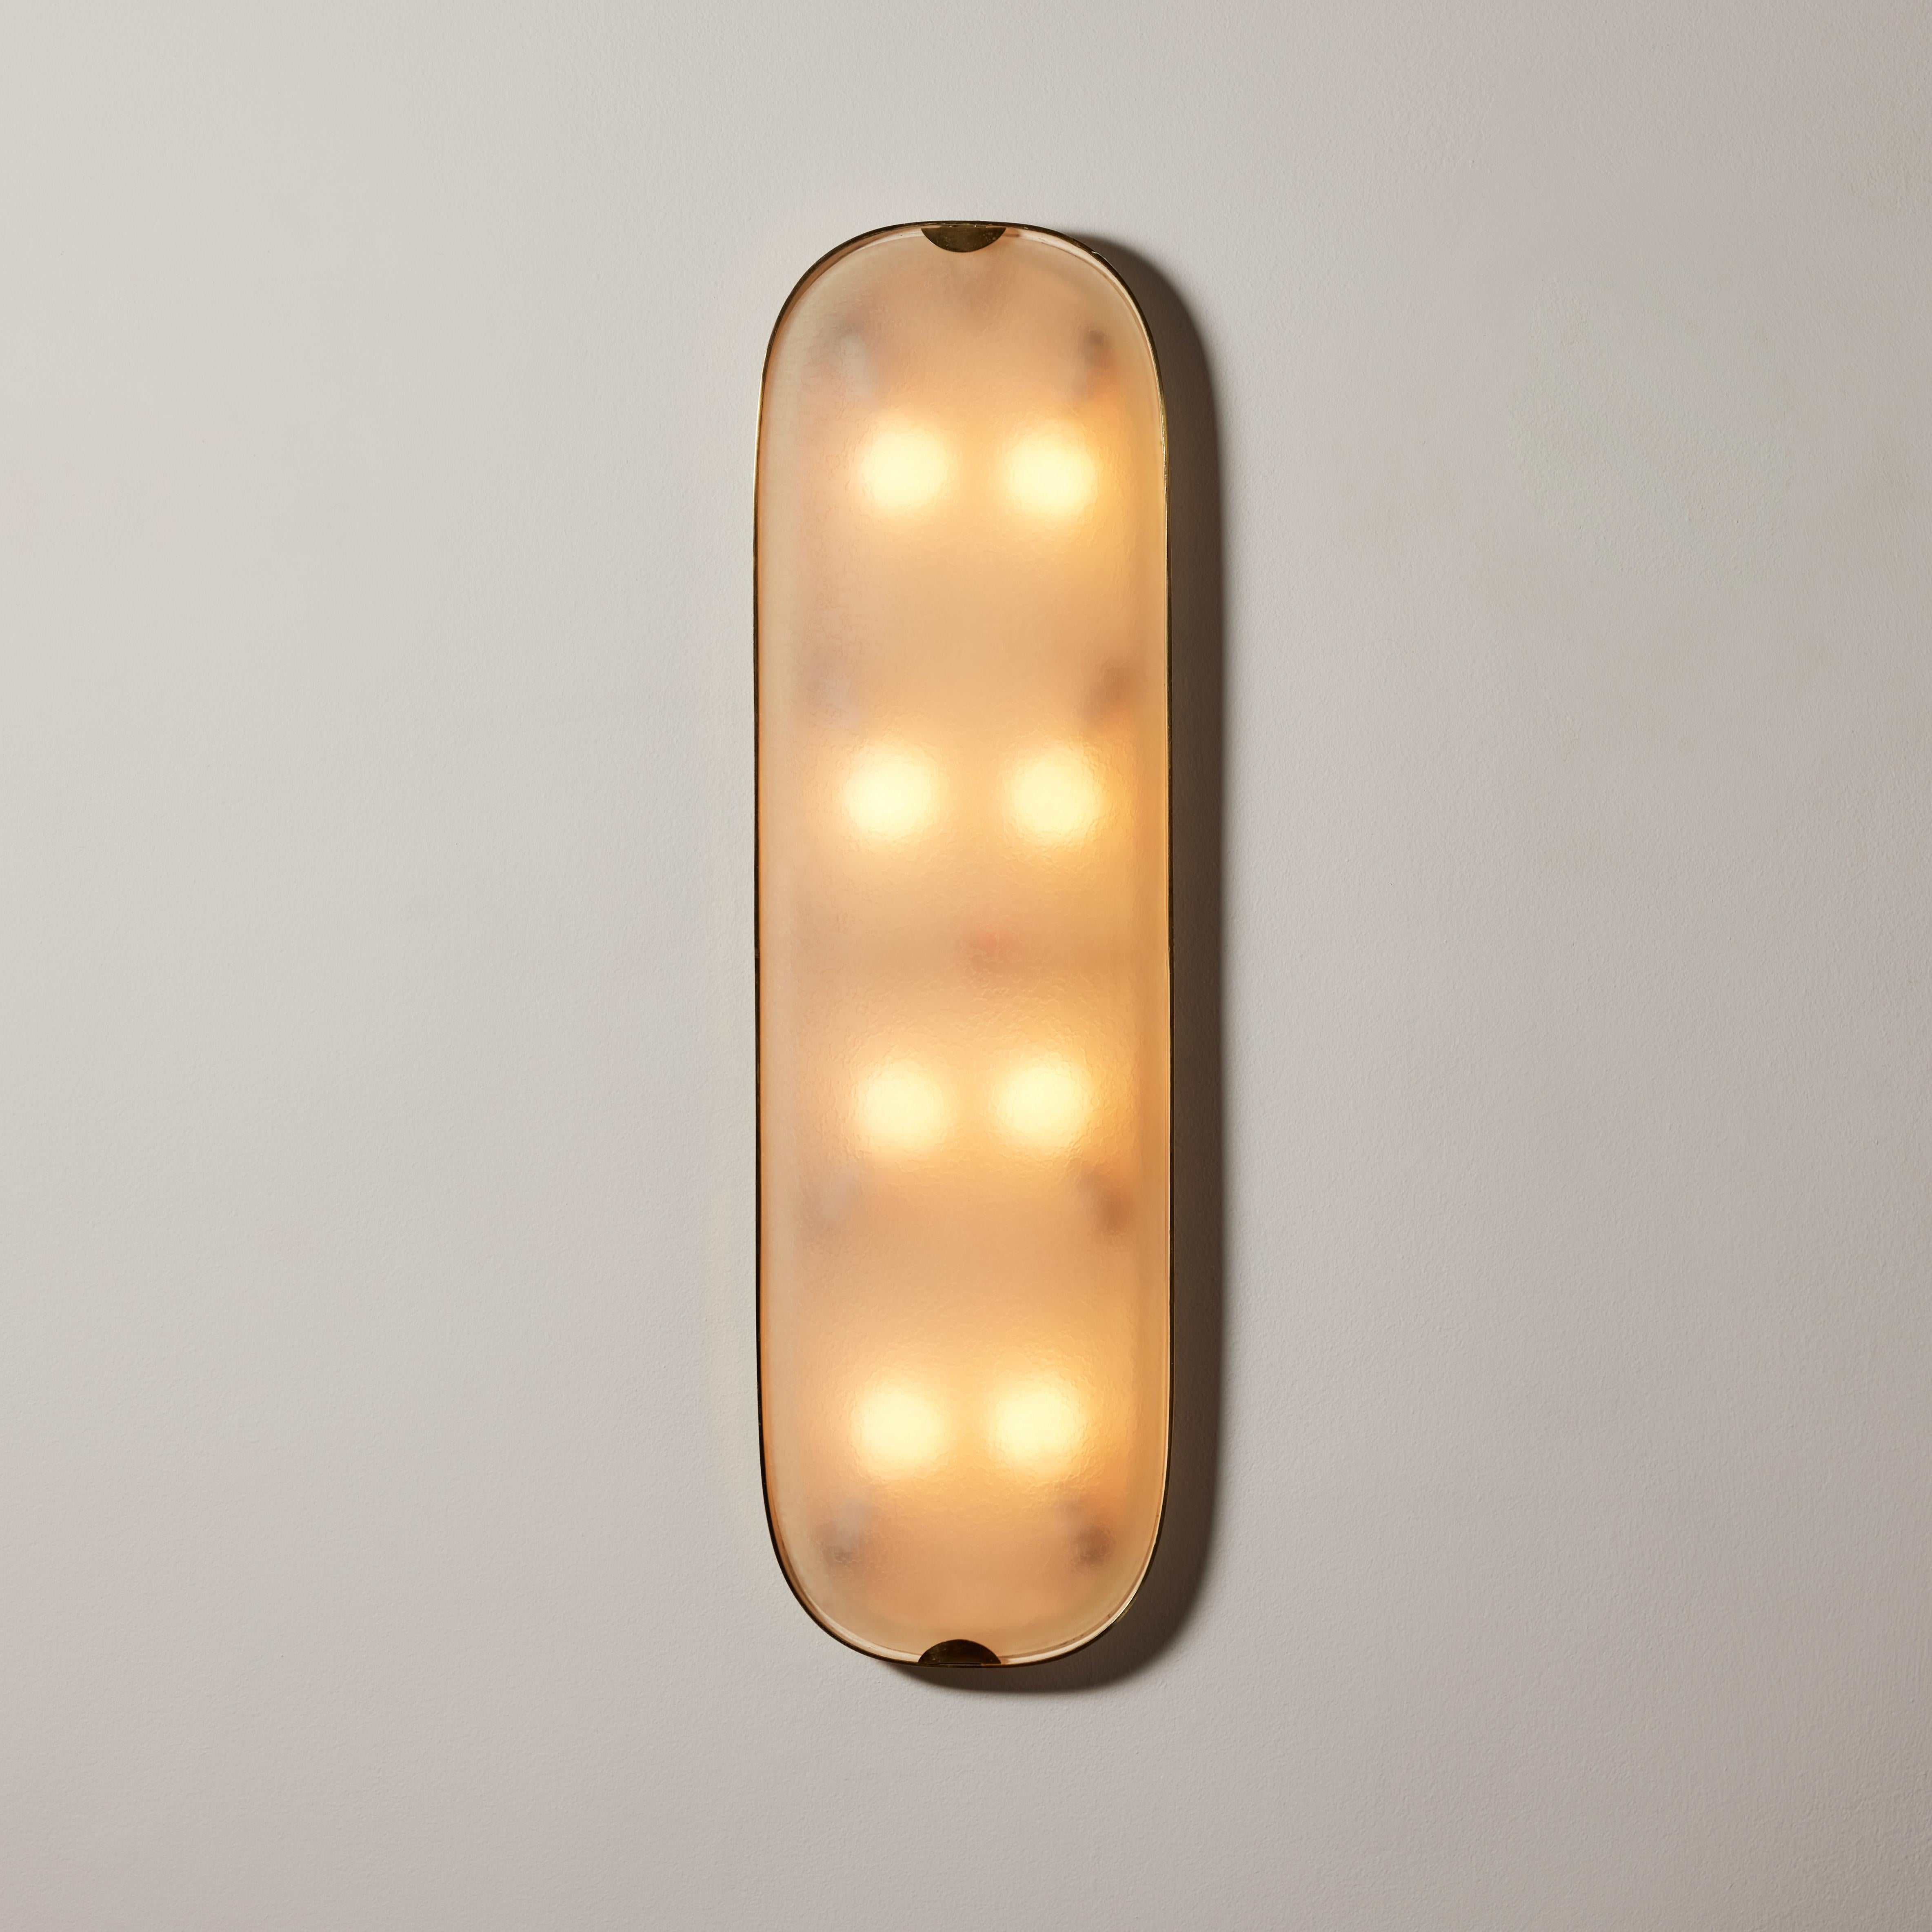 Large and rare flush mount wall/ceiling light by Fontana Arte. Designed and manufactured in Italy, circa 1950's. Glass, brass. Wired for U.S. standards. We recommend eight E14 candelabra 25w maximum bulbs. Bulbs not included.